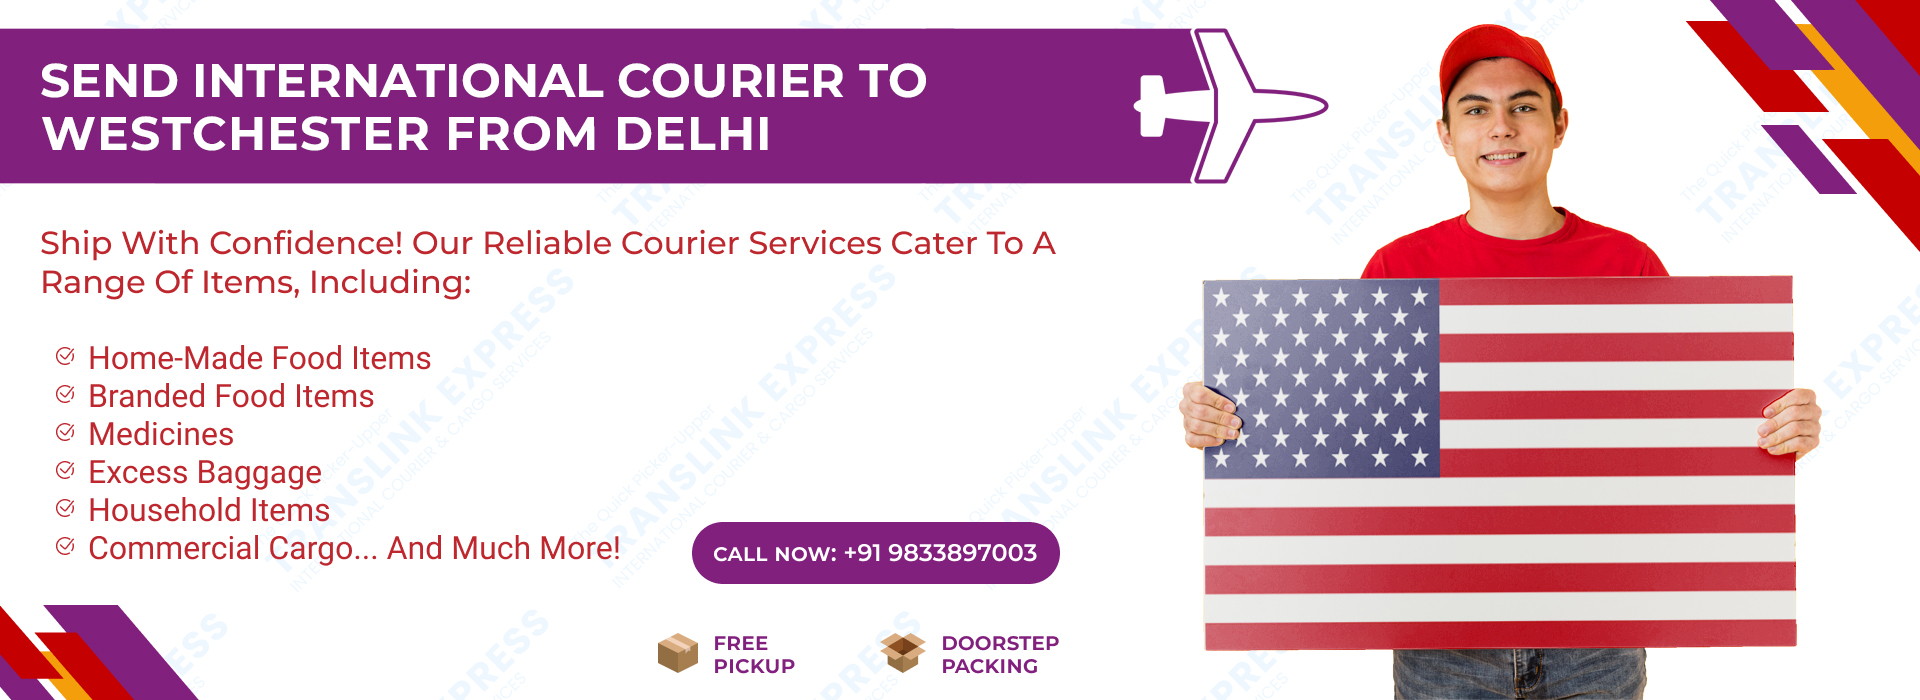 Courier to Westchester From Delhi